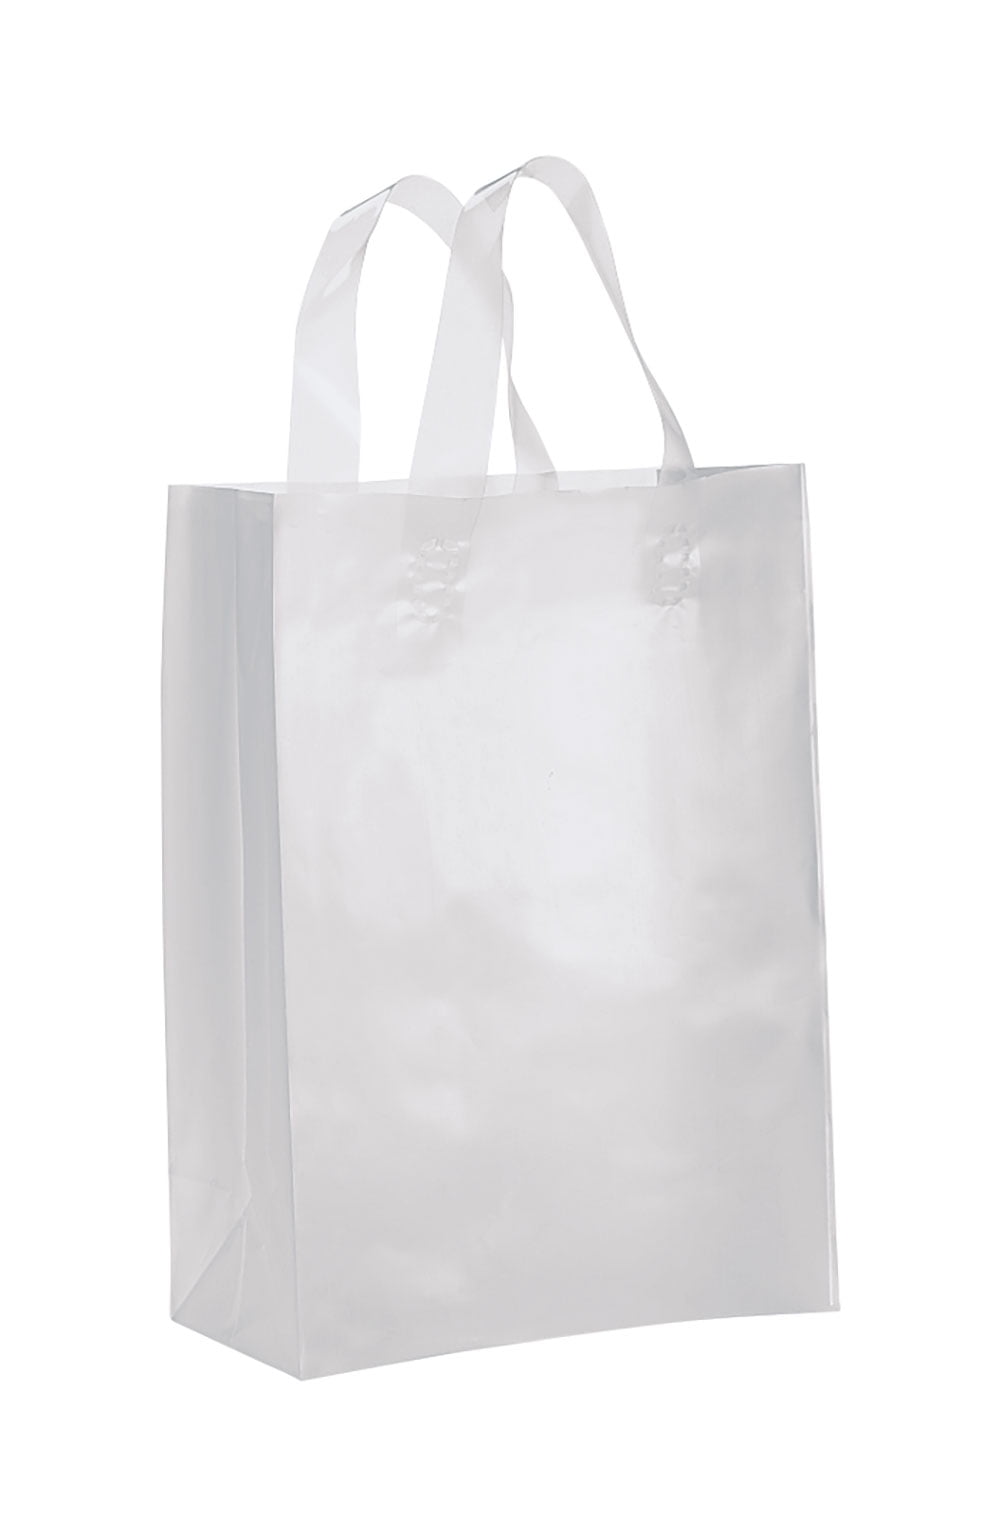 Plastic Bags 25 Zebra Frosty Shopping Large Gift 16 x 6 x 12 Frosted Black White 